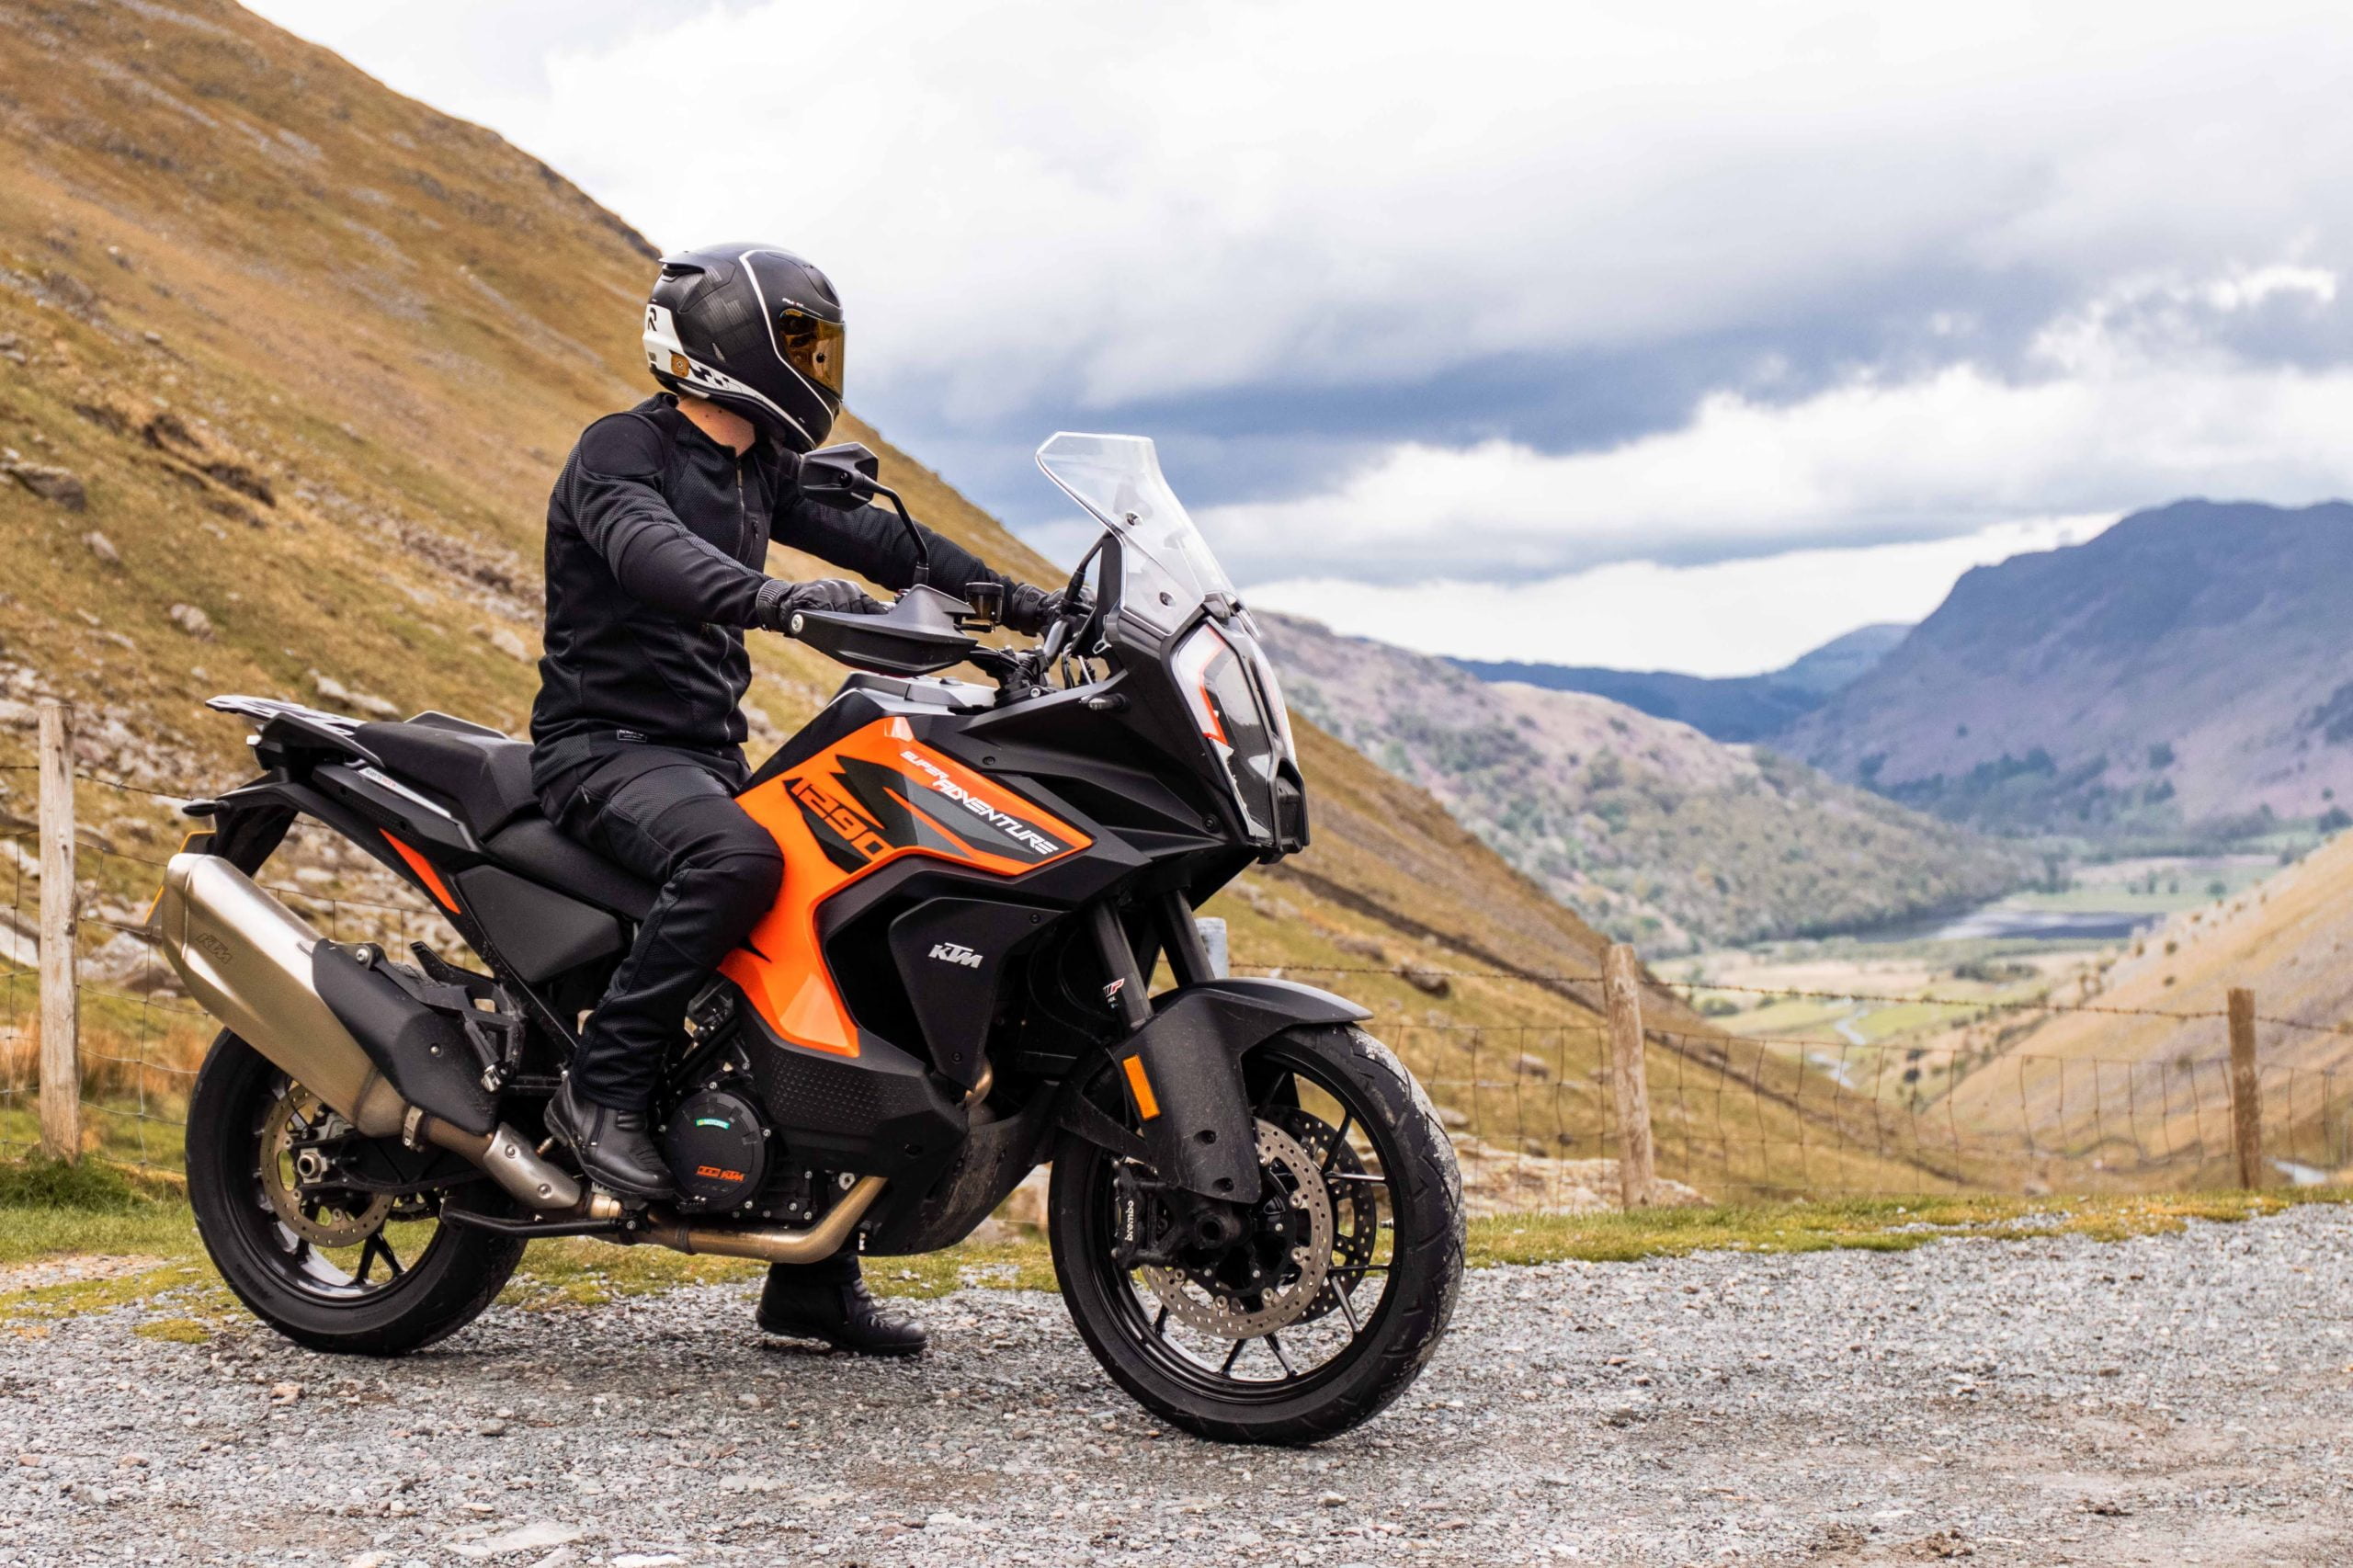 The best motorcycle gear for hot weather – Knox